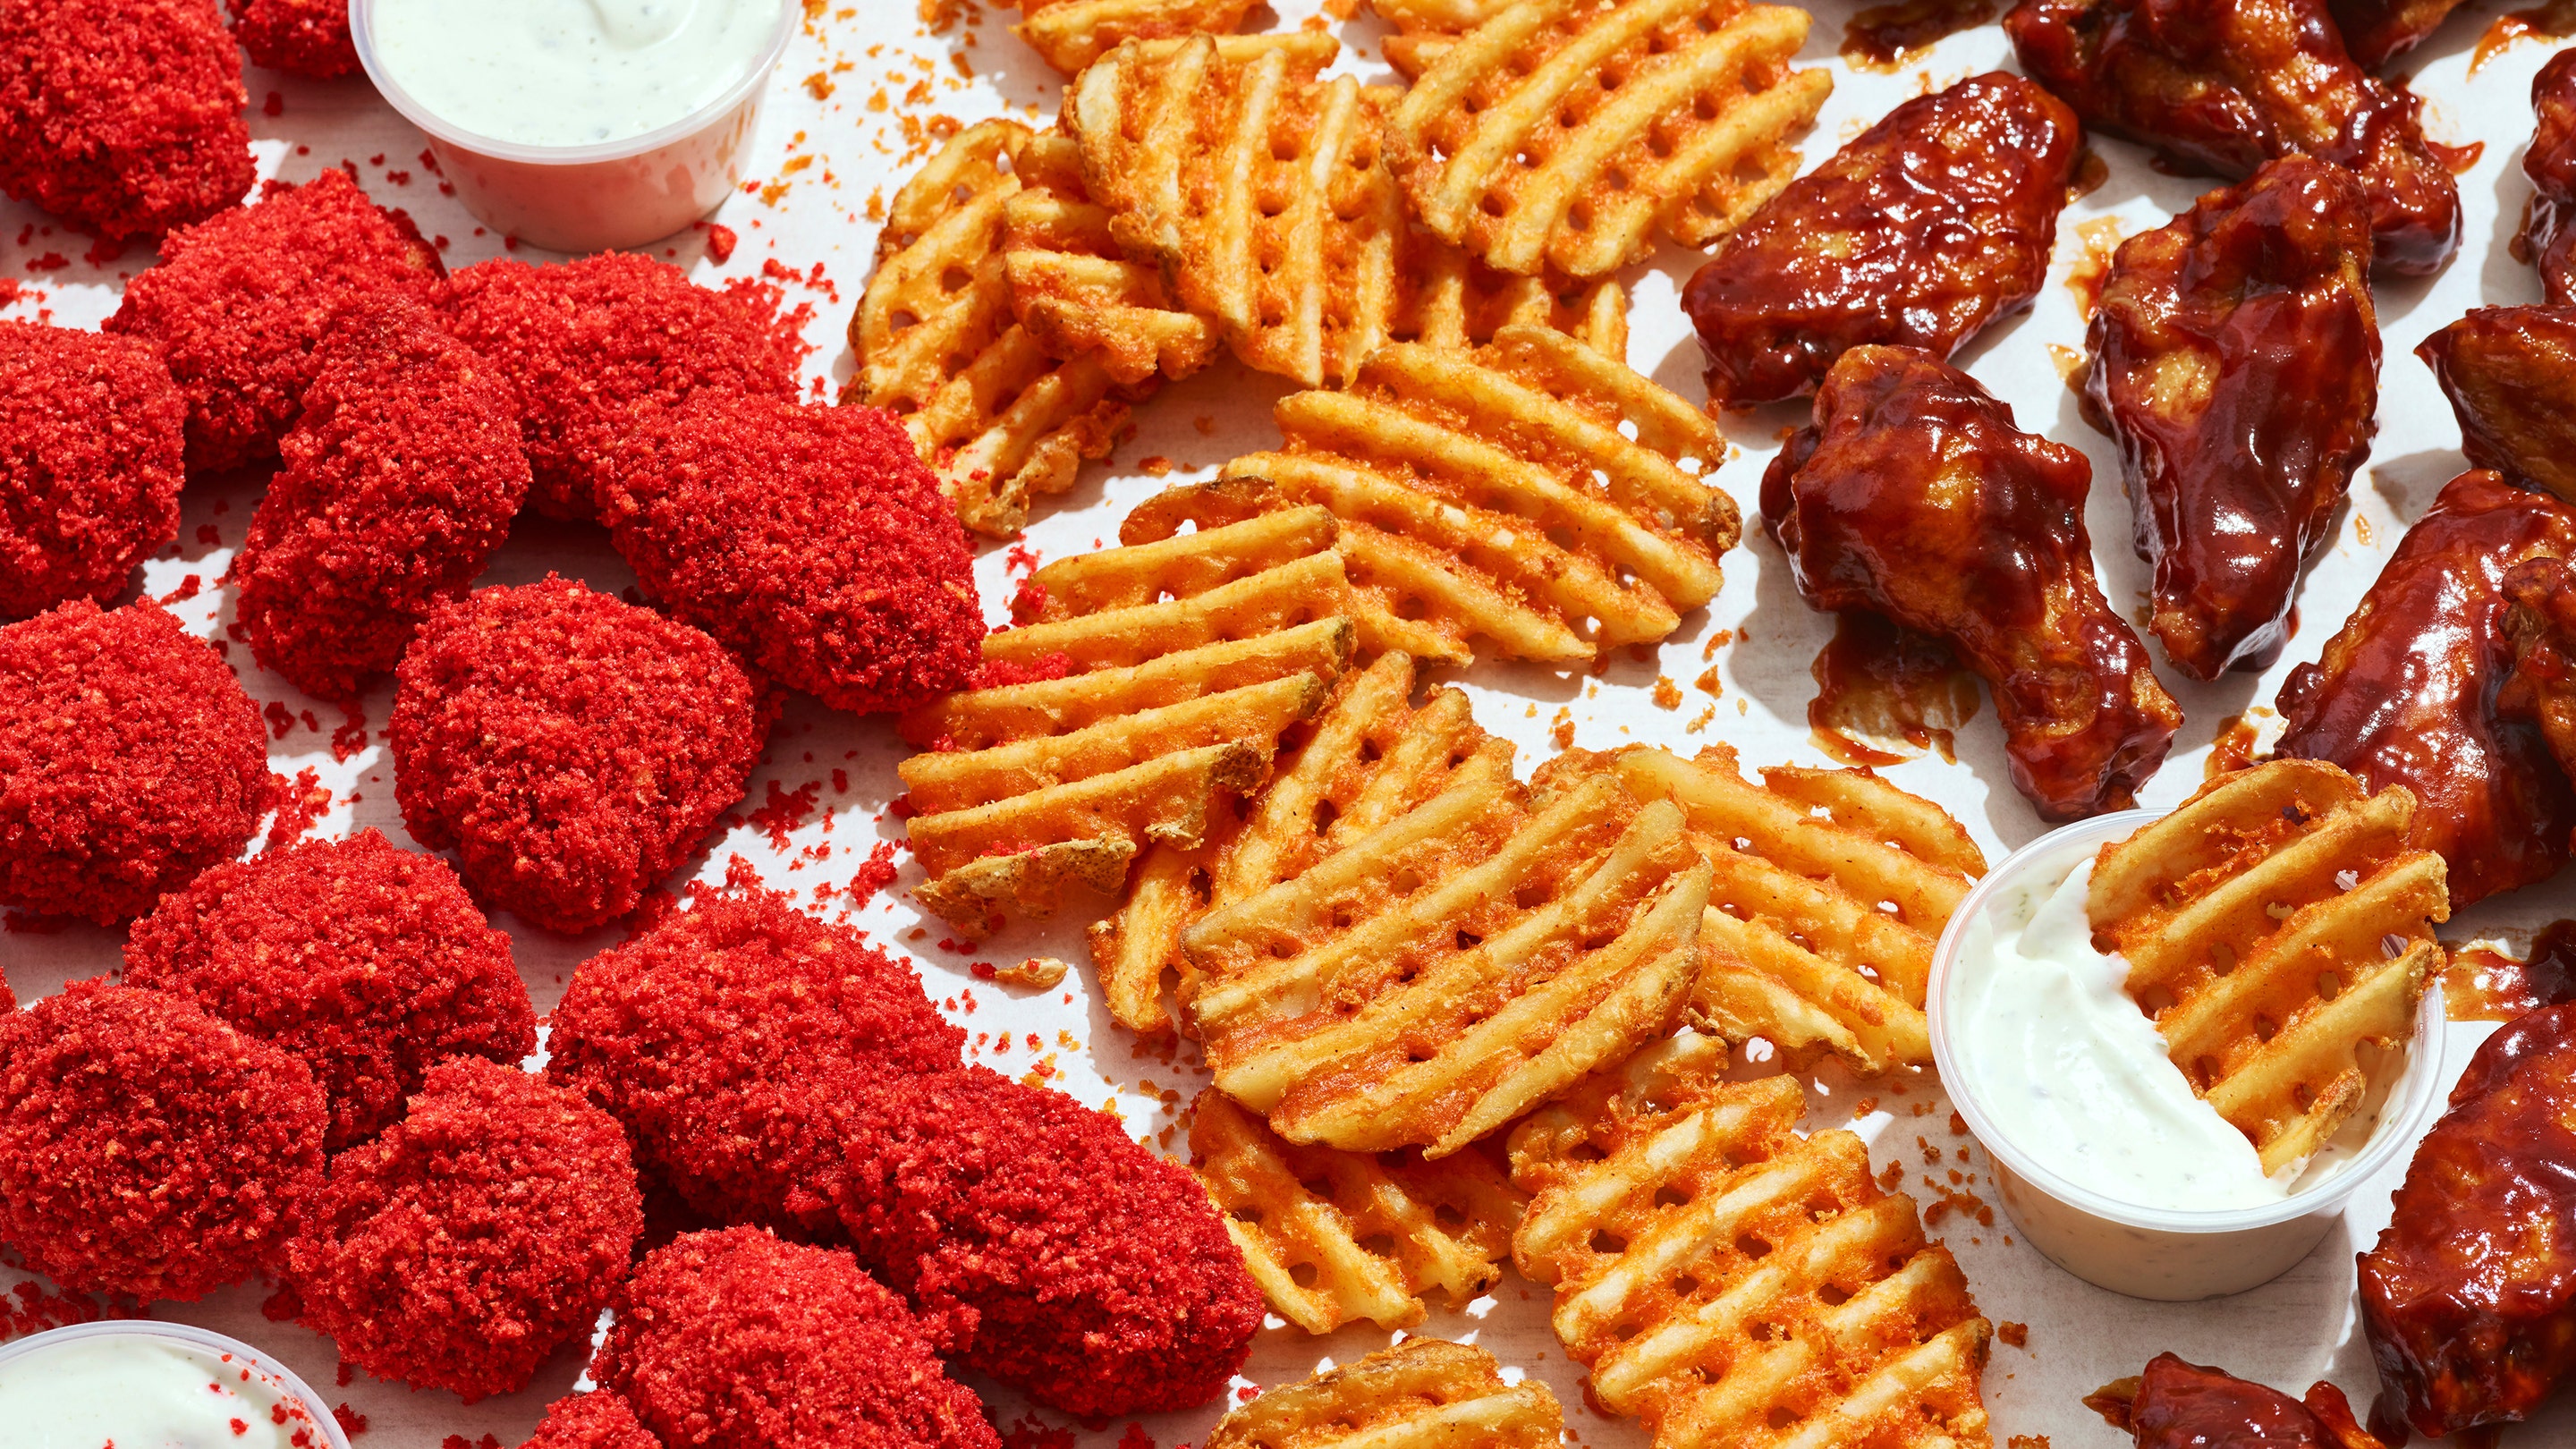 Applebee’s new virtual kitchen sells Cheetos-flavored wings